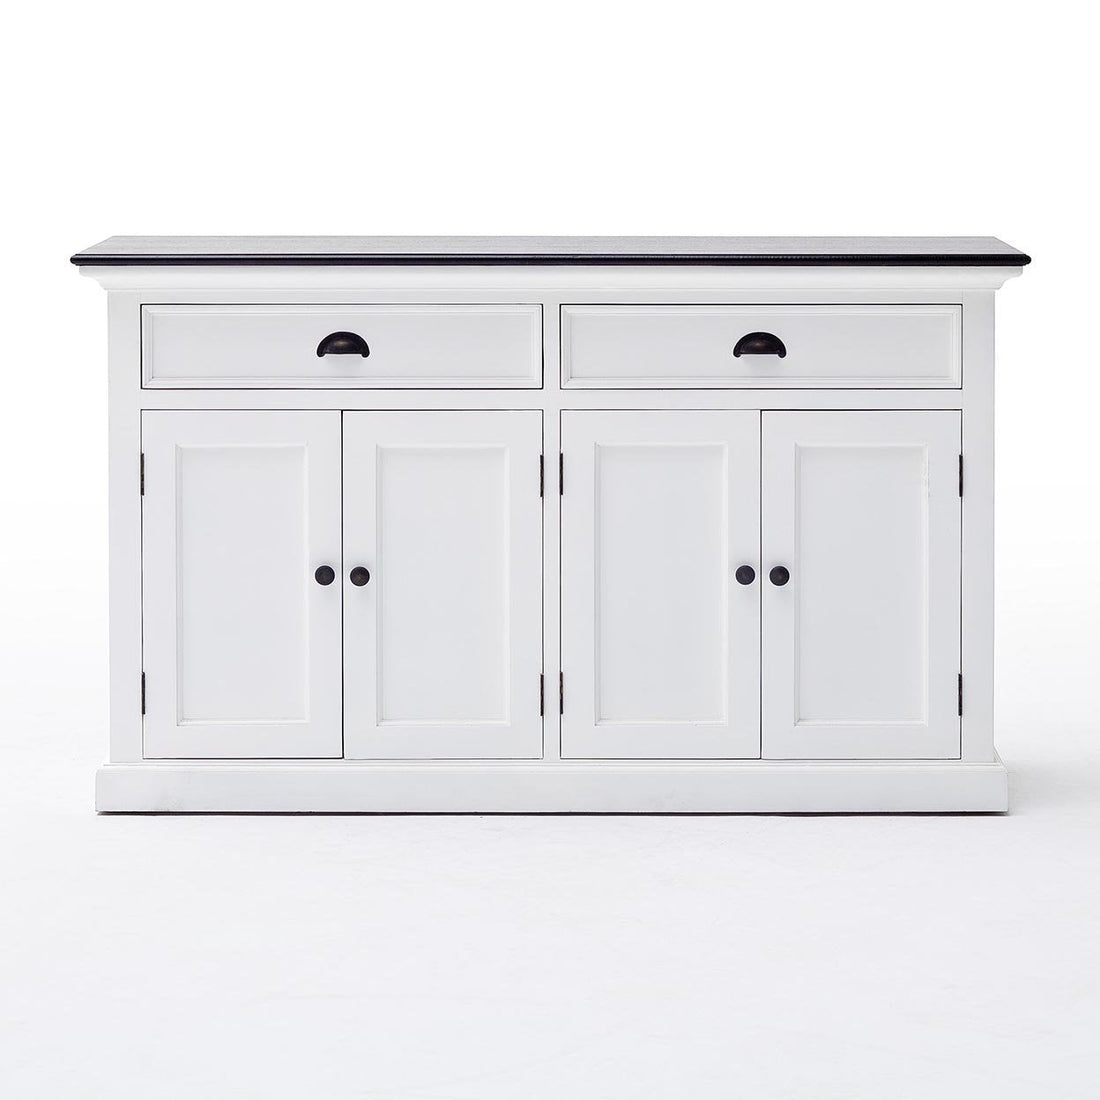 Halifax Contrast sideboard with 2 drawers